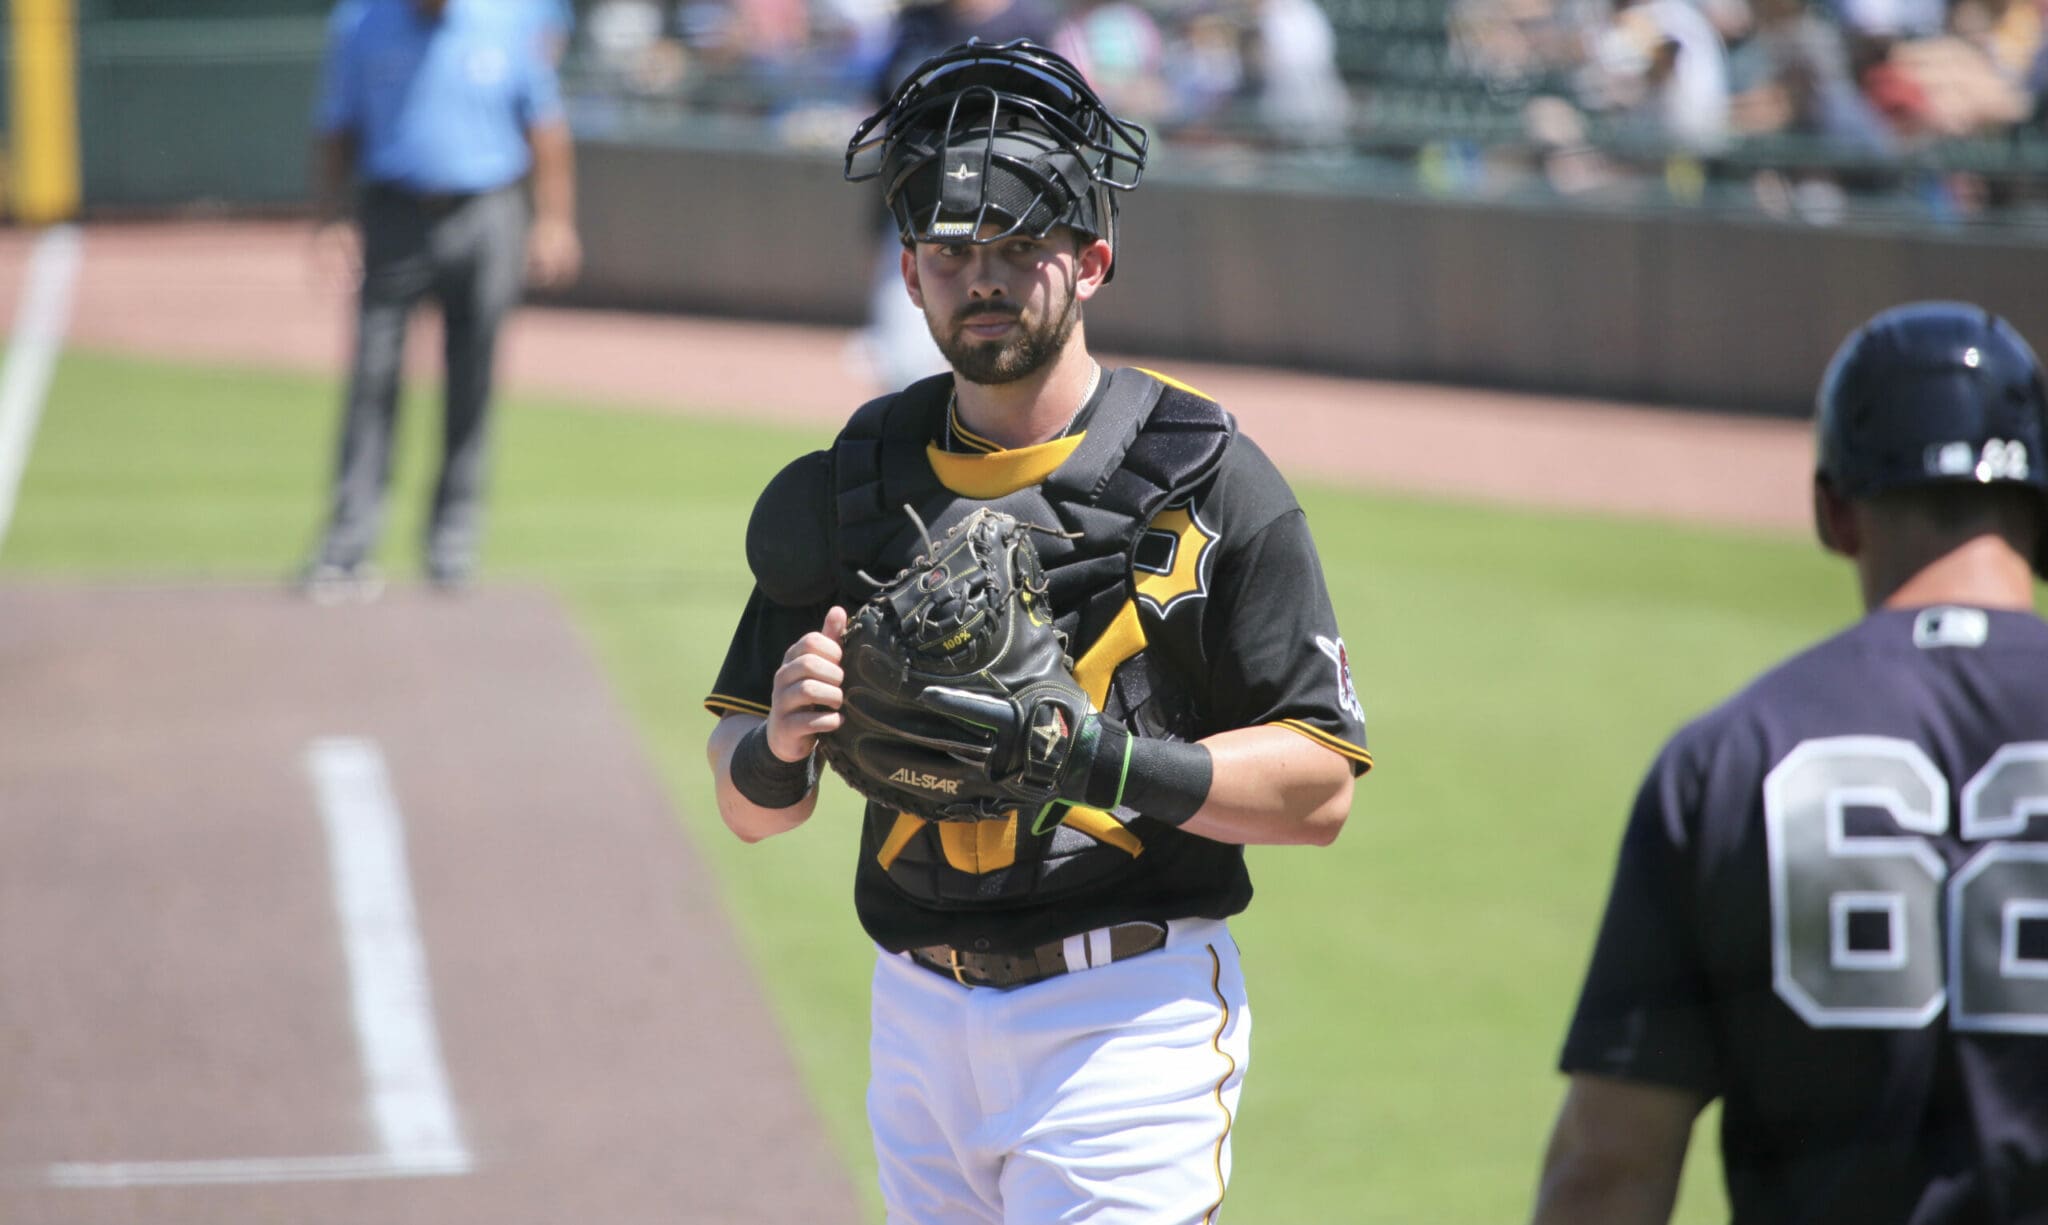 Pirates catchers five all time best